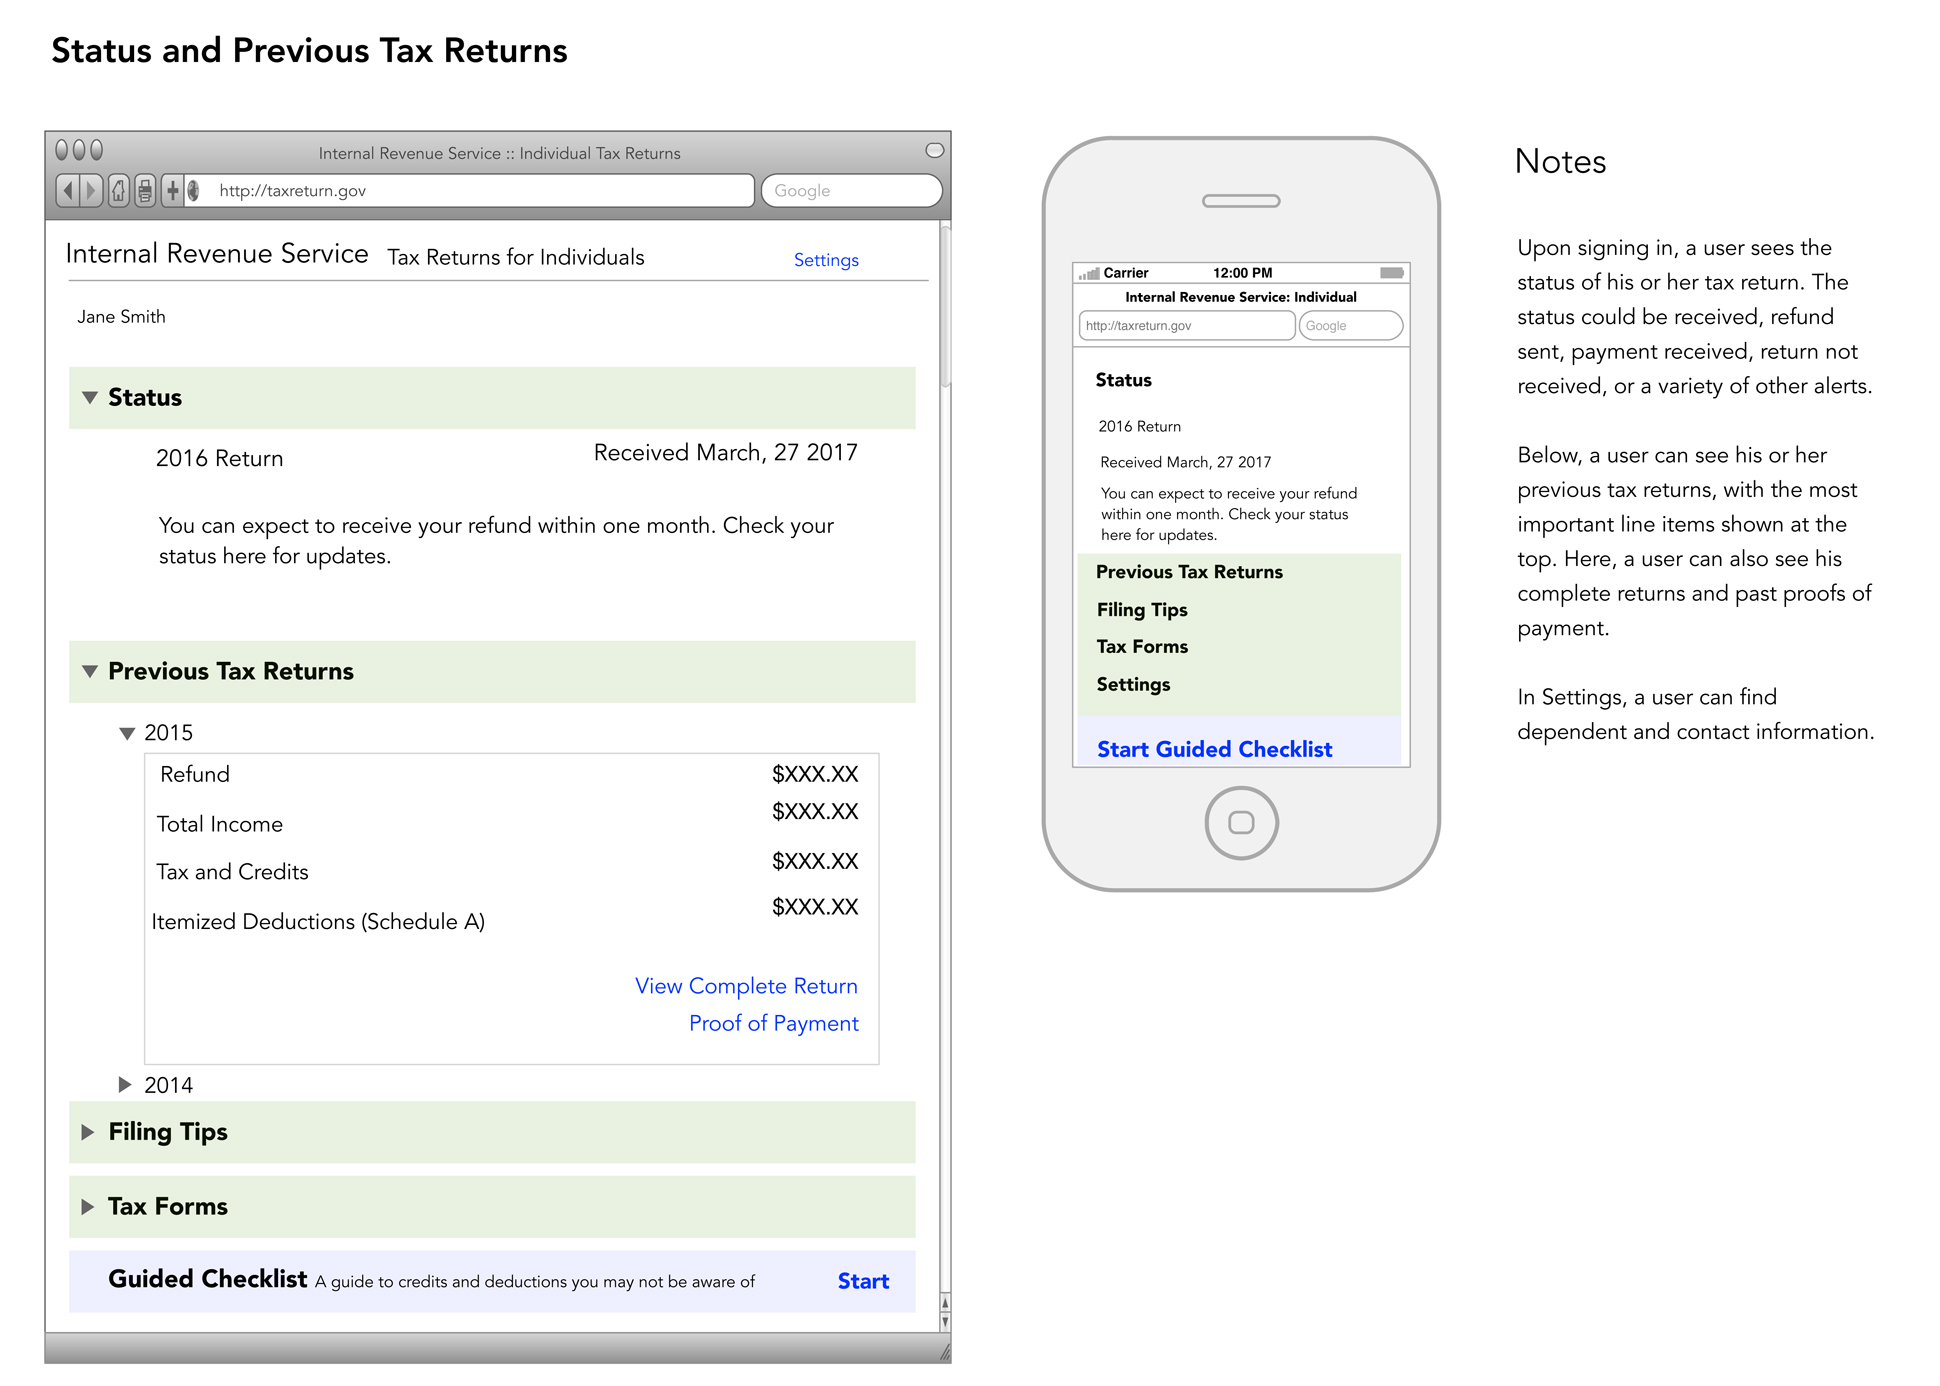 A page from a tax design challenge submission. Status and previous tax return screens are shown for both the desktop and mobile view.